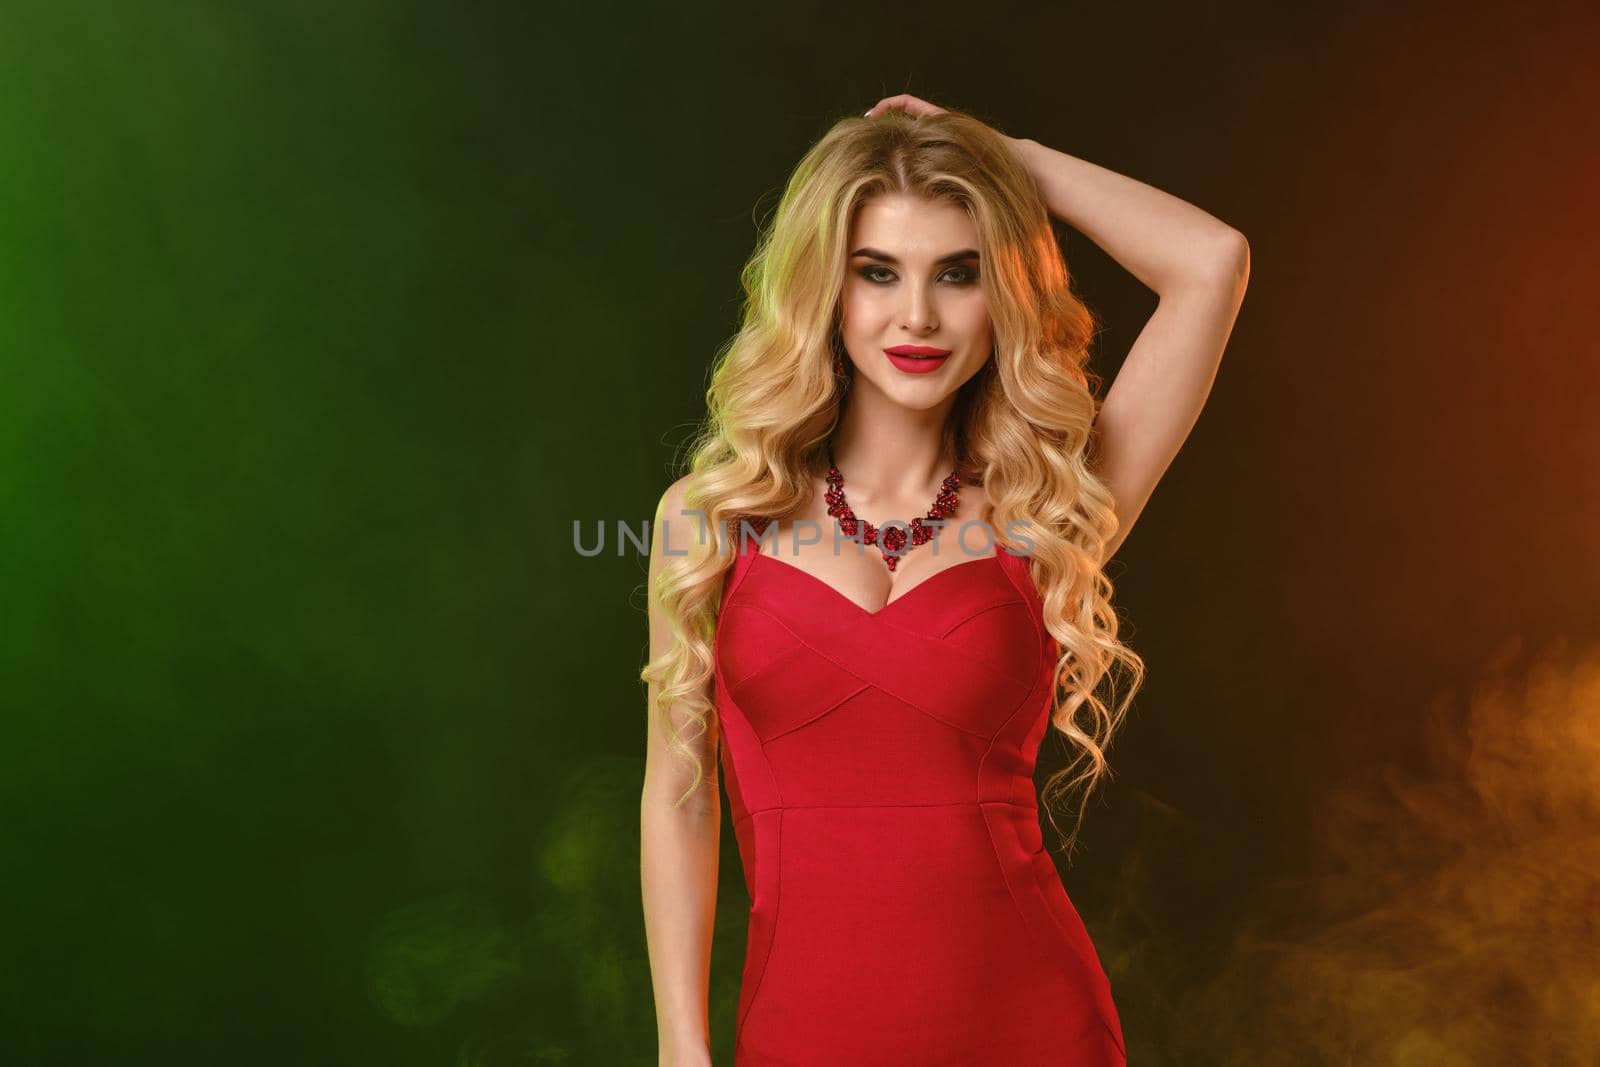 Charming curly blonde lady with bright make-up, in red fitting dress and necklace. She is smiling while posing against colorful smoky studio background. Fashion and beauty. Close up, copy space